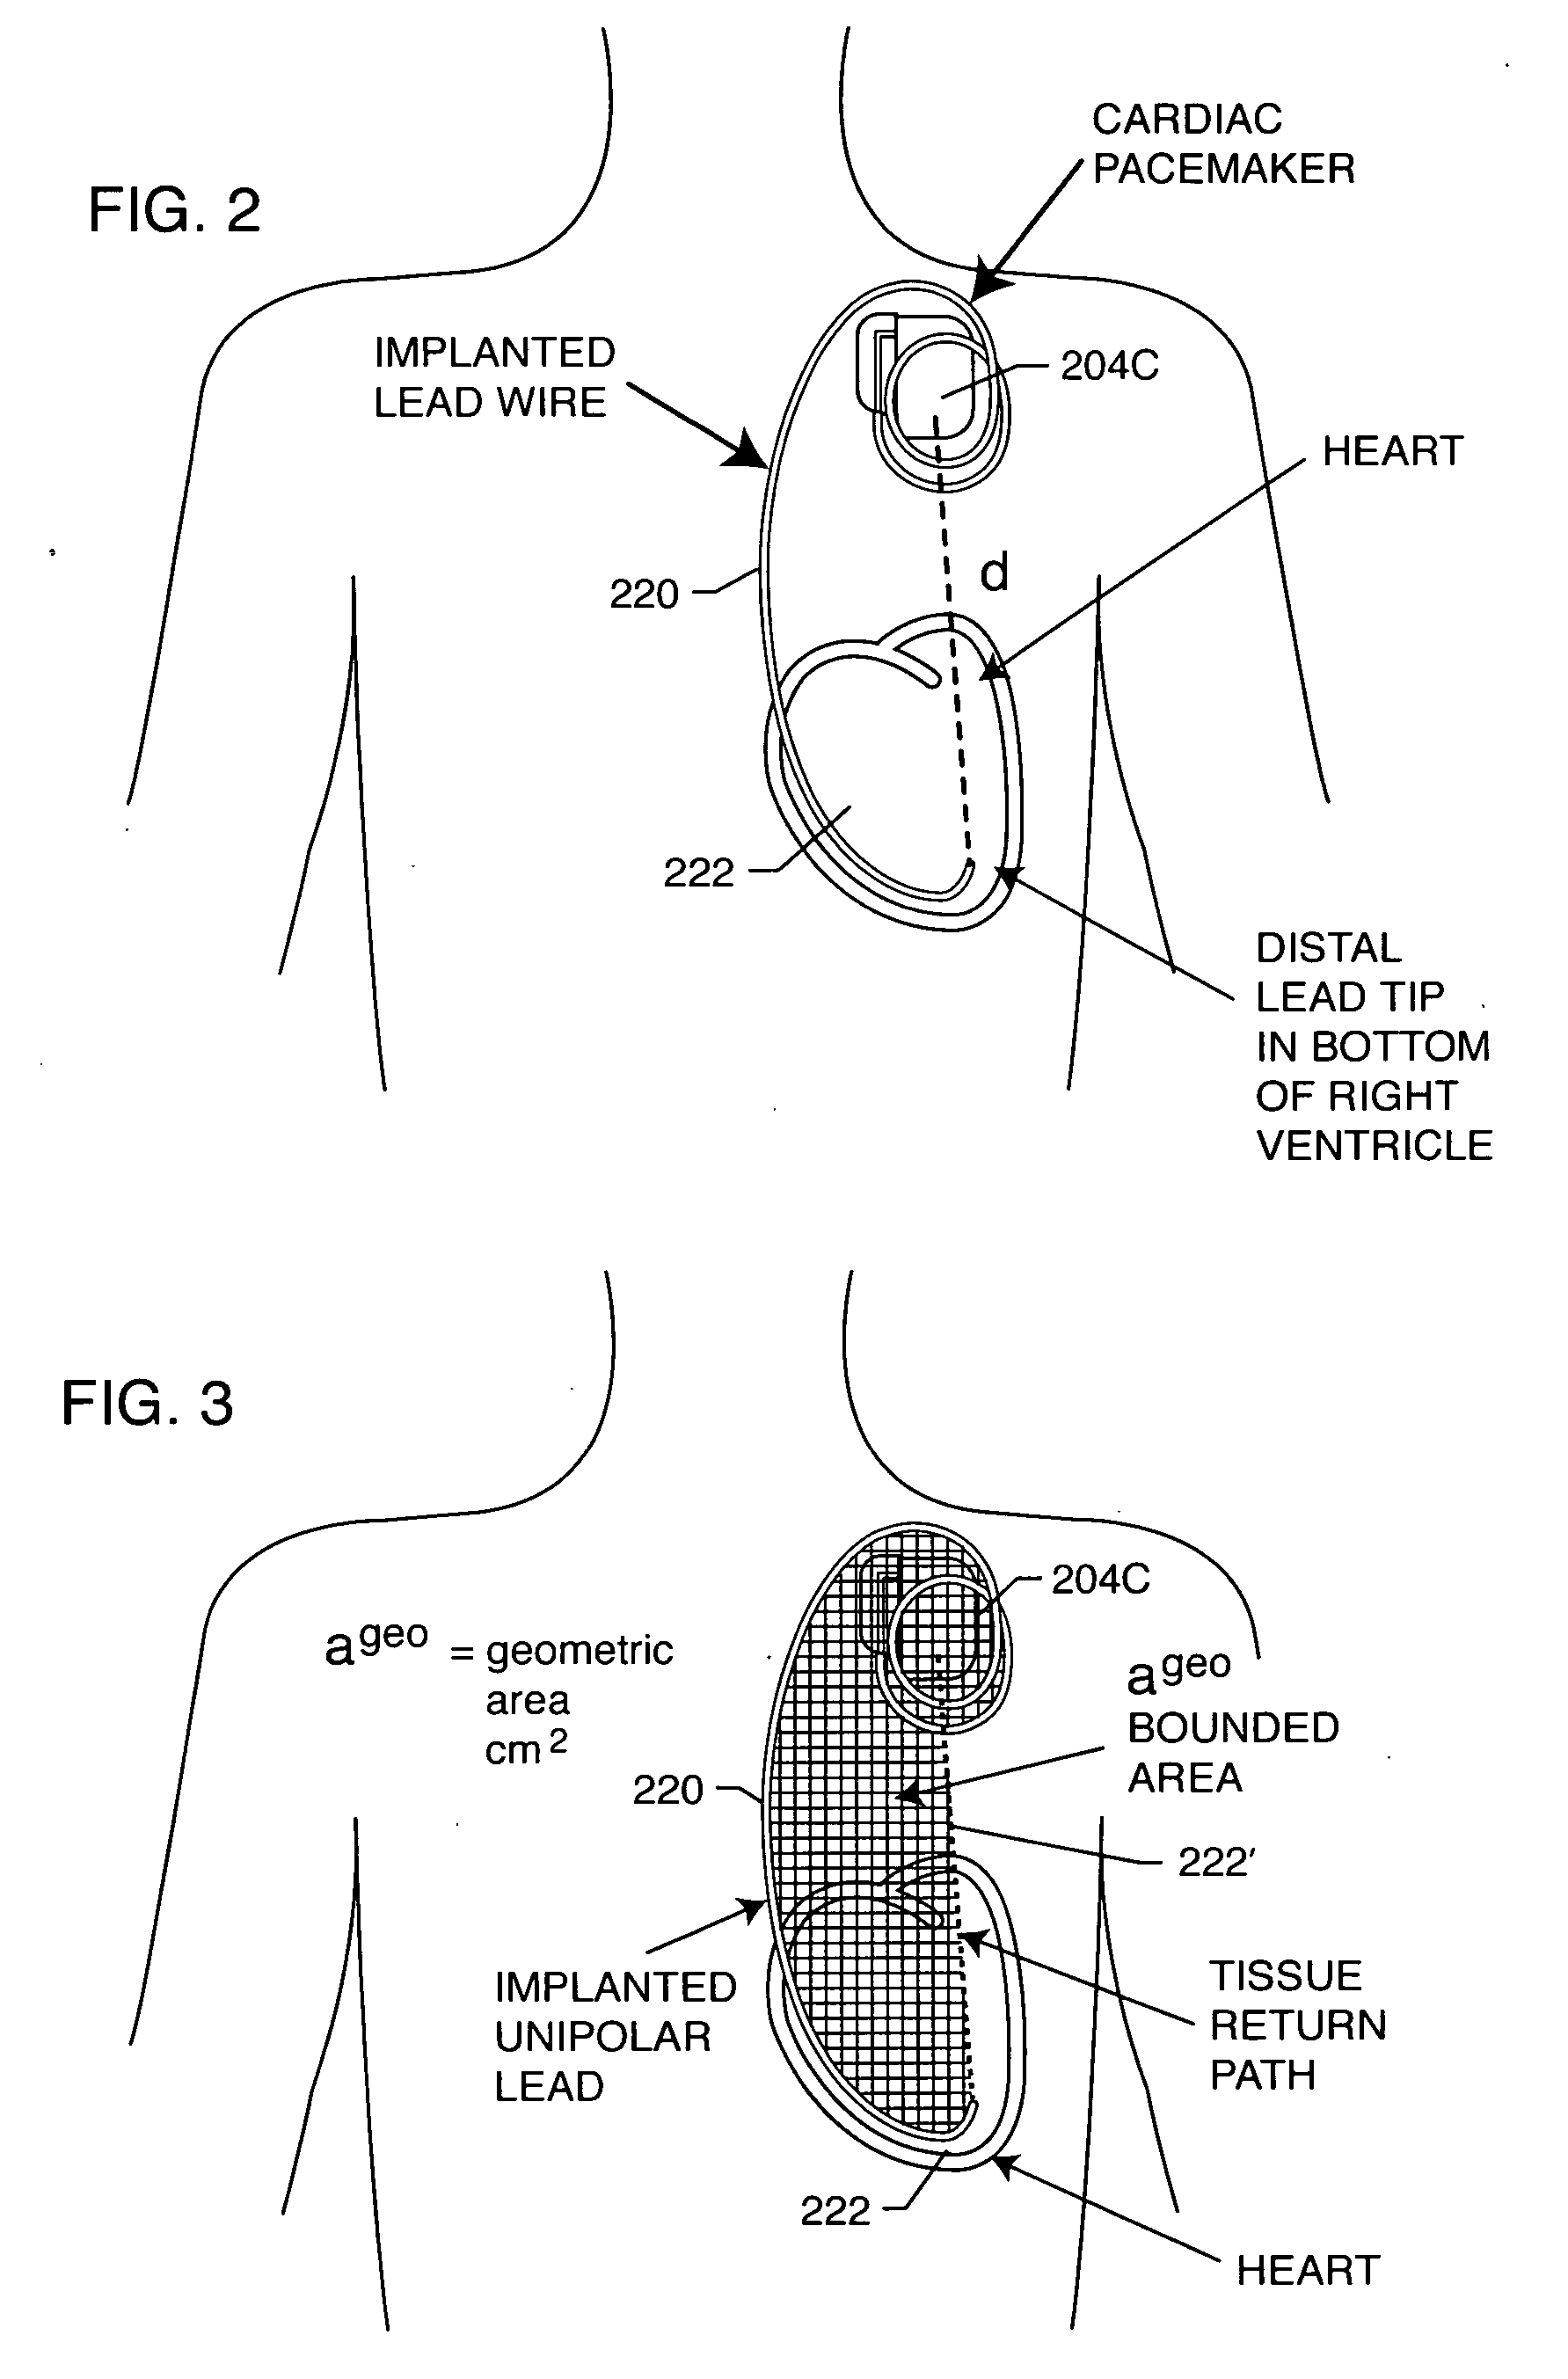 Apparatus and process for reducing the susceptability of active implantable medical devices to medical procedures such as magnetic resonance imaging